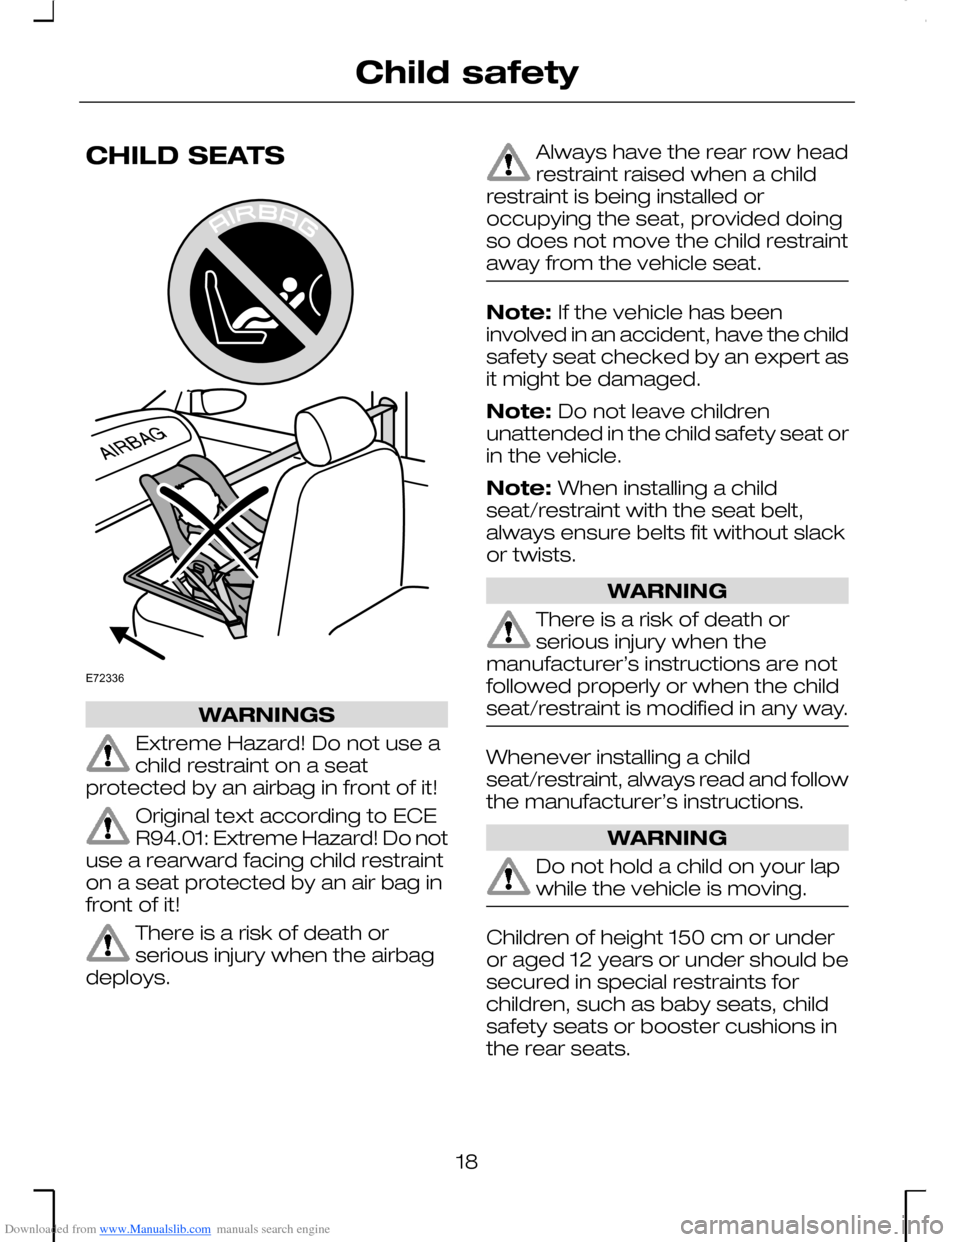 FORD MONDEO 2006 2.G Owners Manual Downloaded from www.Manualslib.com manuals search engine CHILD SEATS
WARNINGS
Extreme Hazard! Do not use achild restraint on a seatprotected by an airbag in front of it!
Original text according to ECE